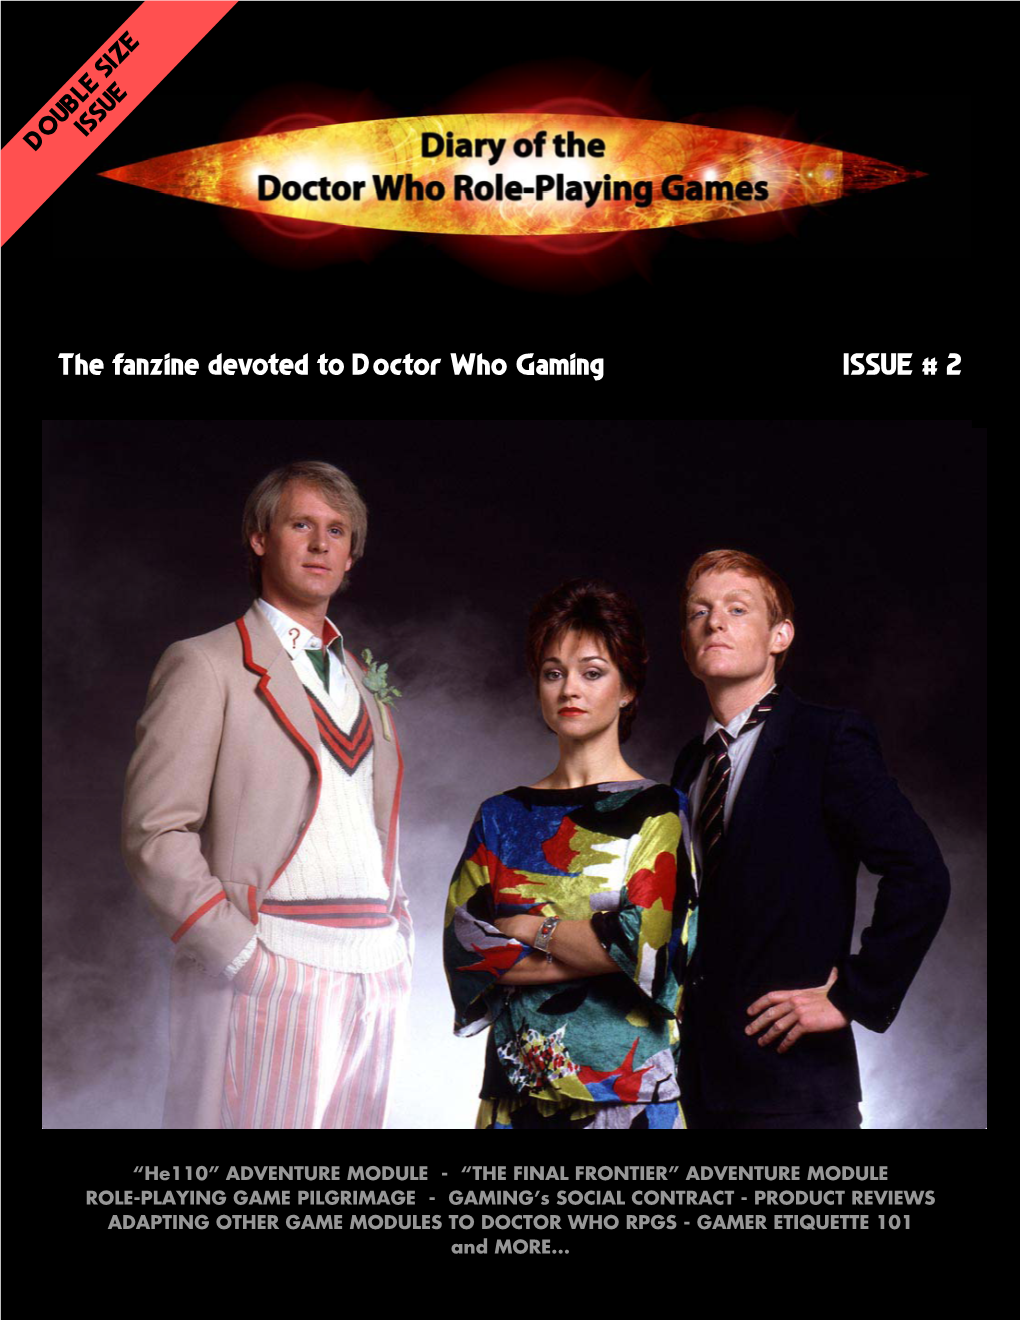 Diary of the Doctor Who Role-Playing Games, Issue